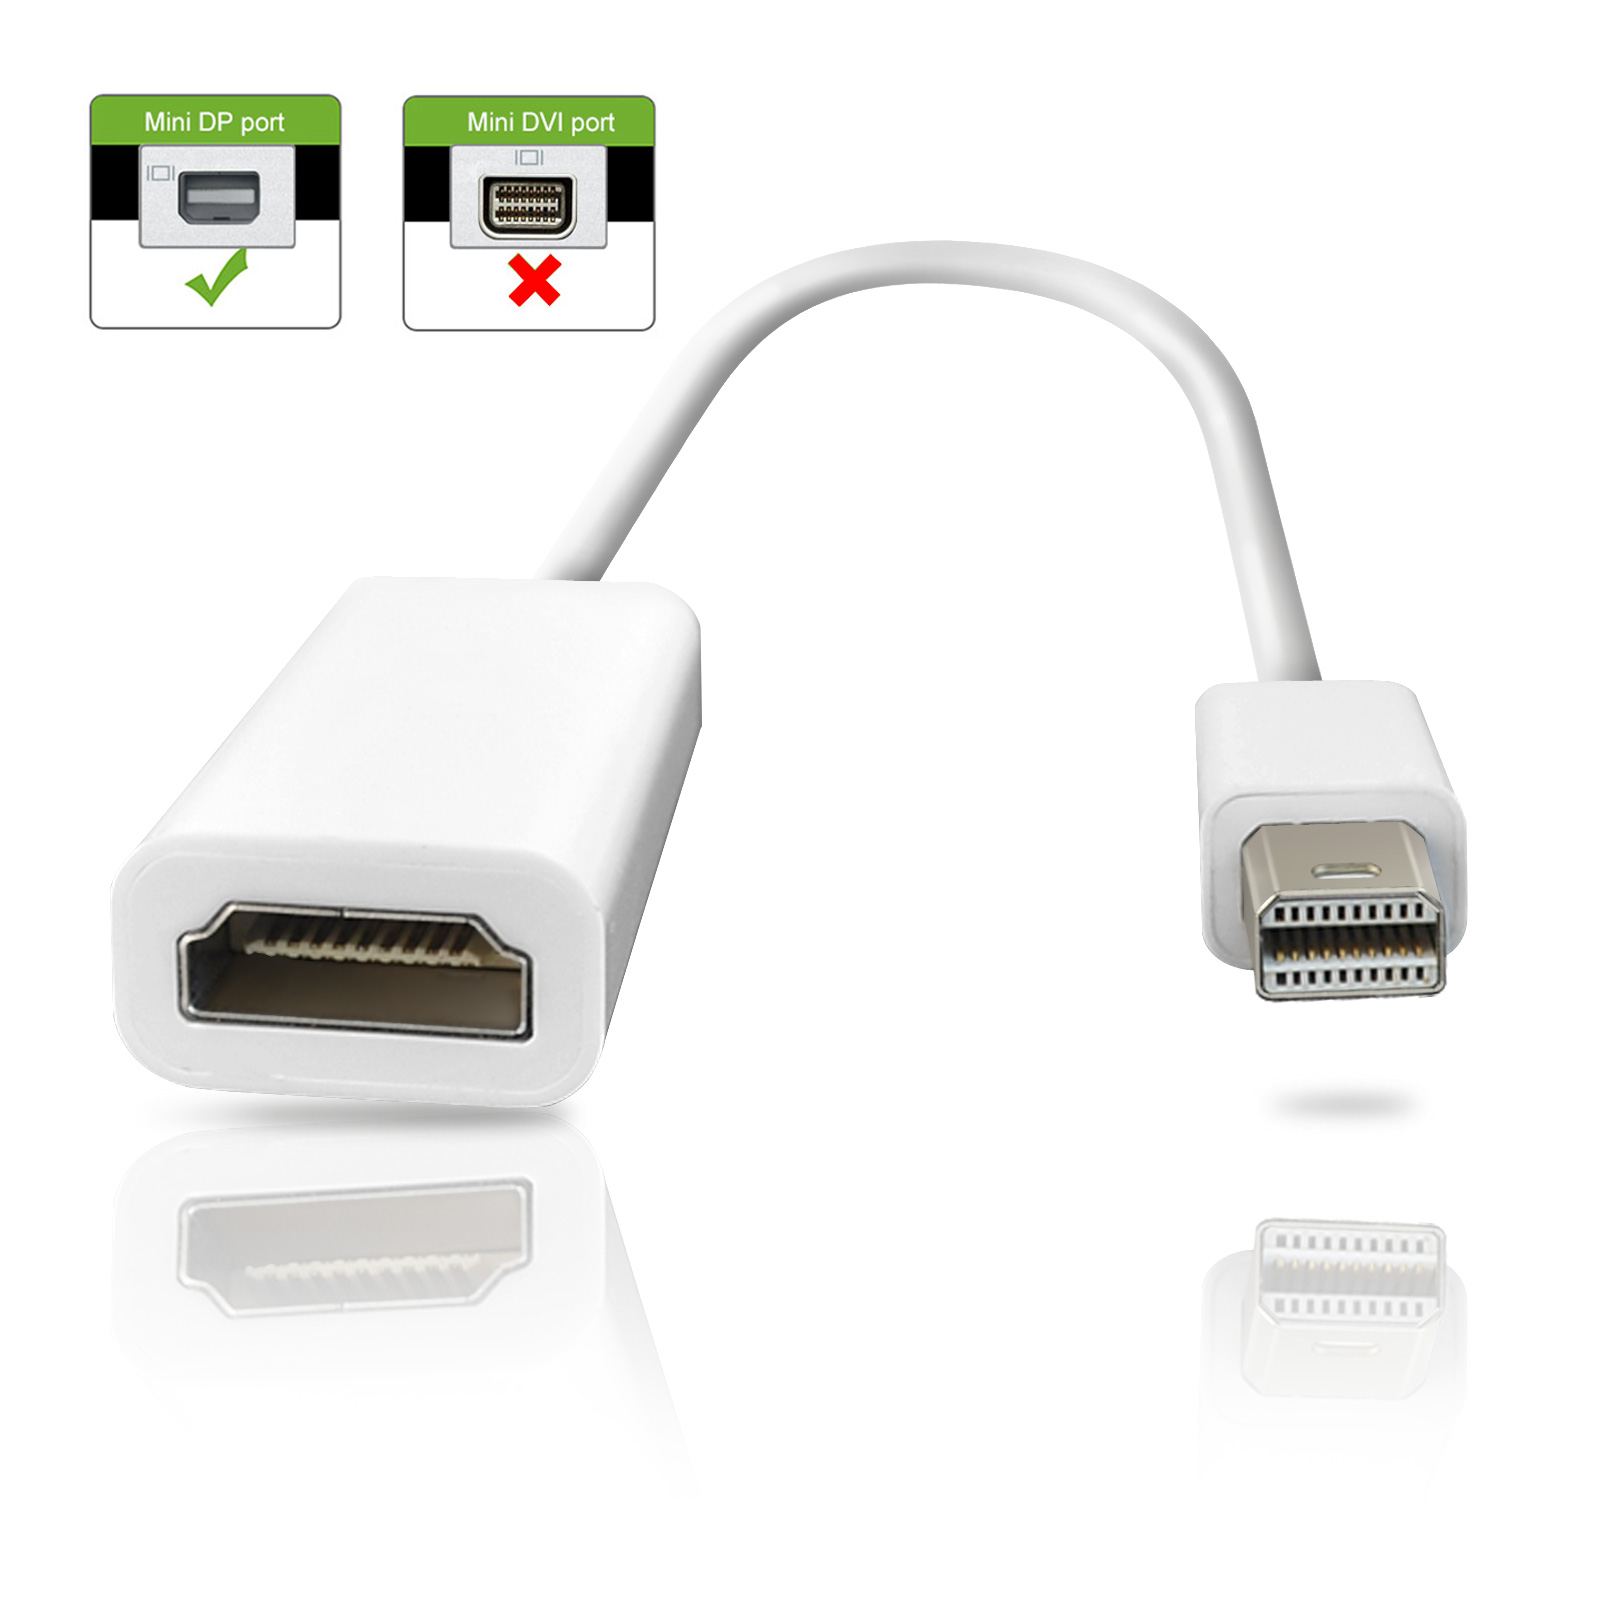 thunderbolt to hdmi adapter not working on macbook air